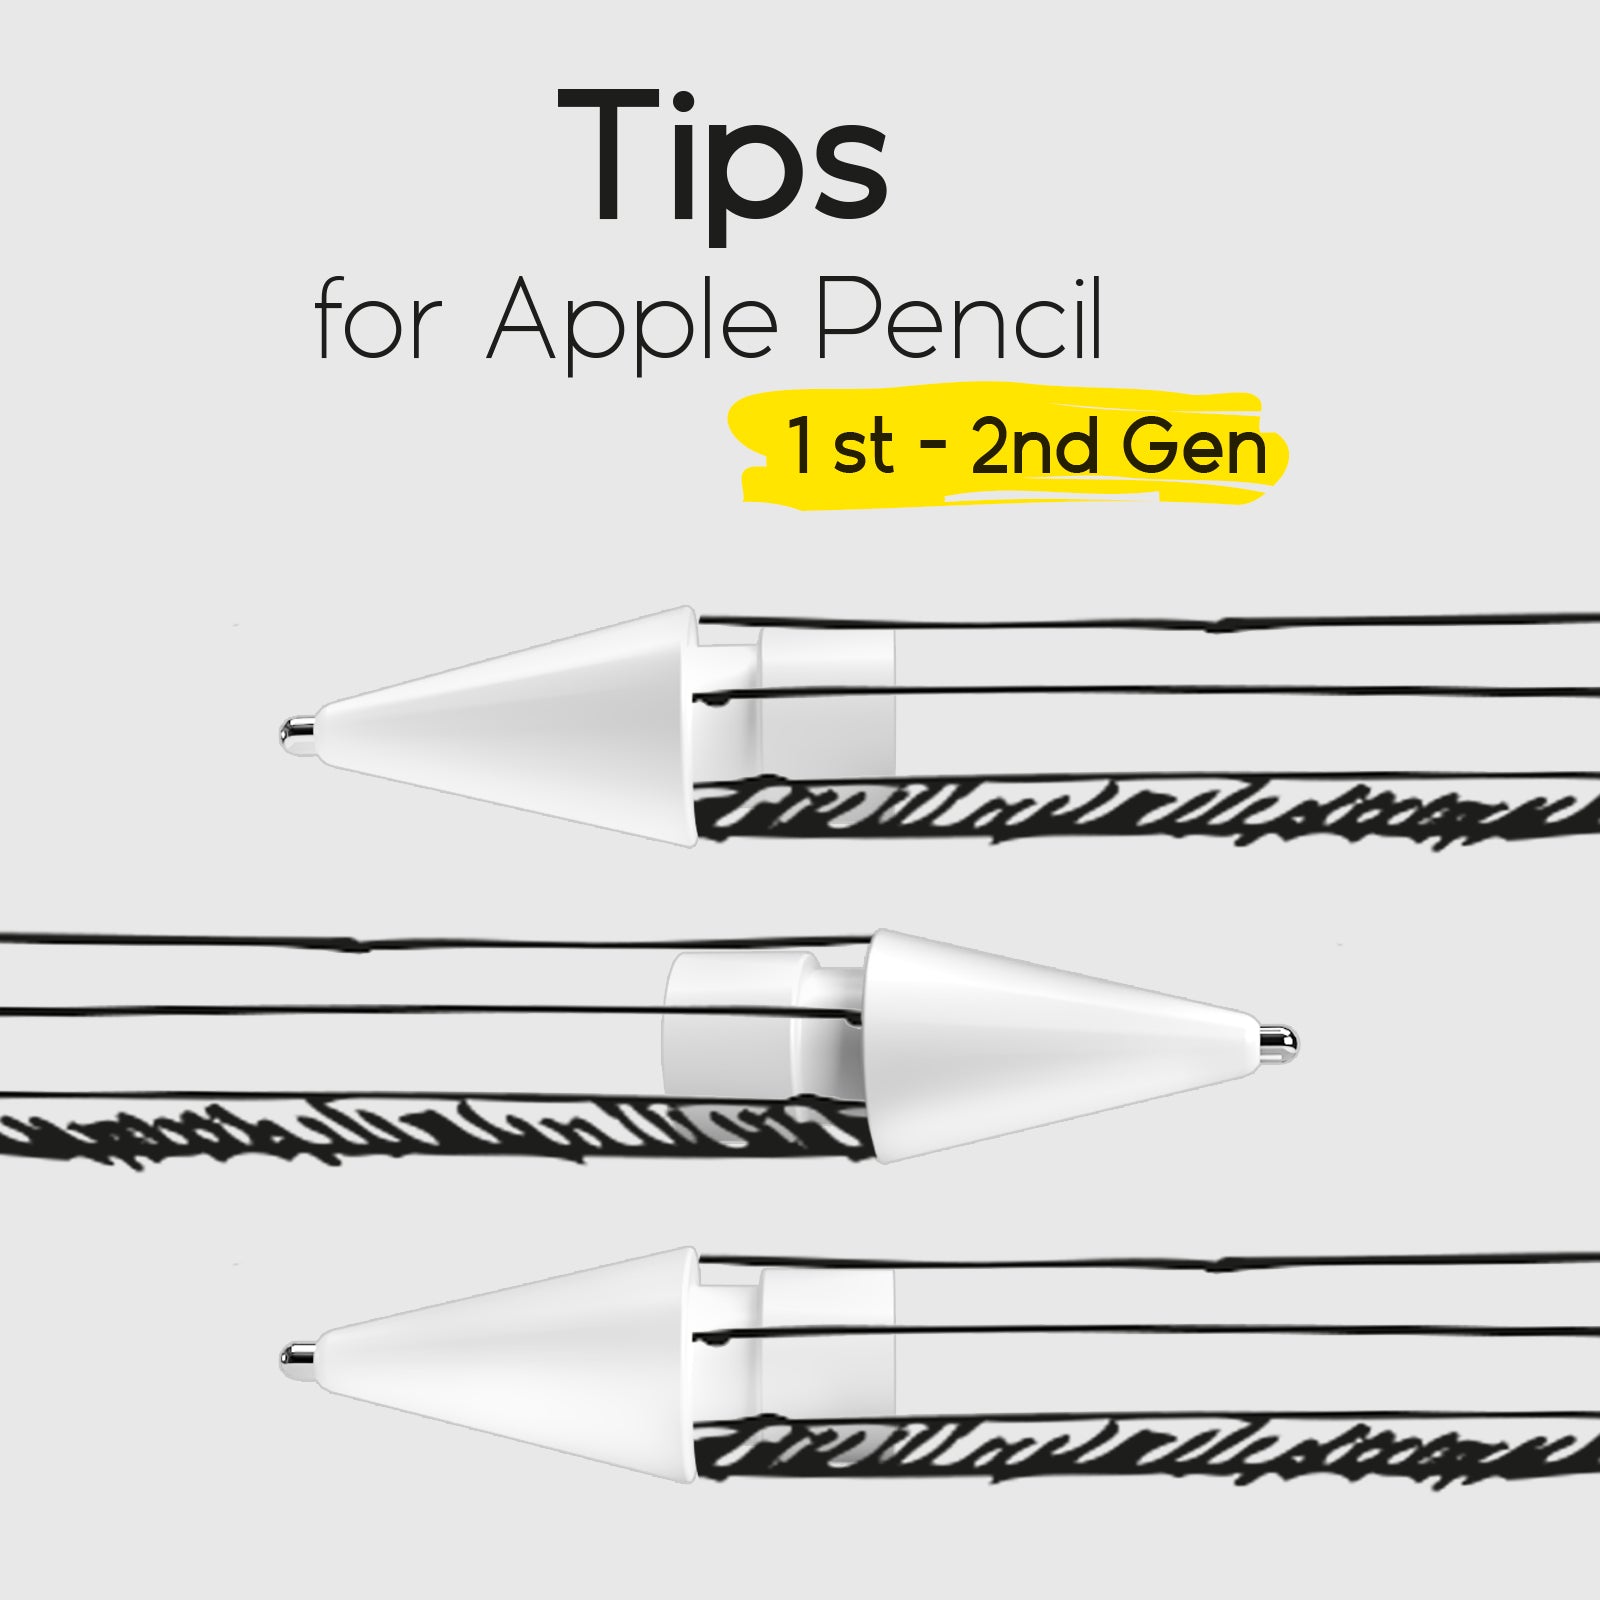 Replacement ABS tips for Apple Pencil Pro/1st and 2nd generation Apple Pencils